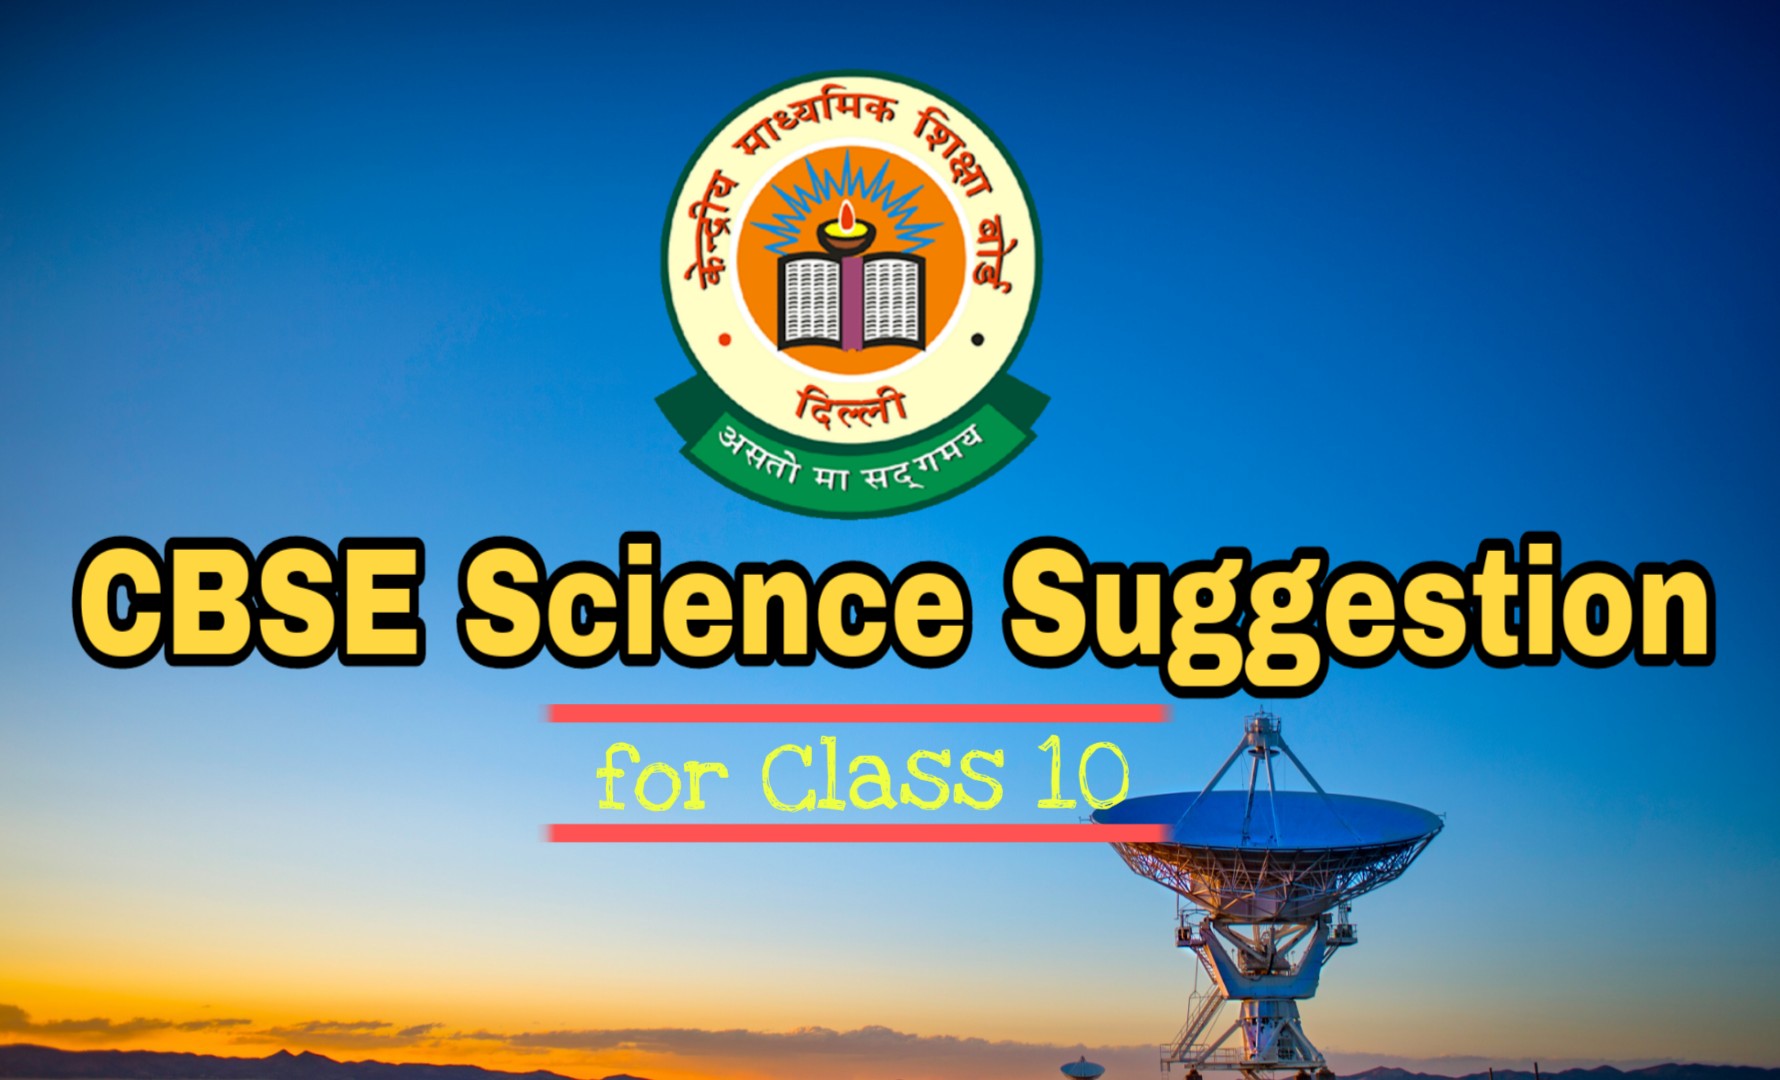 CBSE Science Suggestion 2019